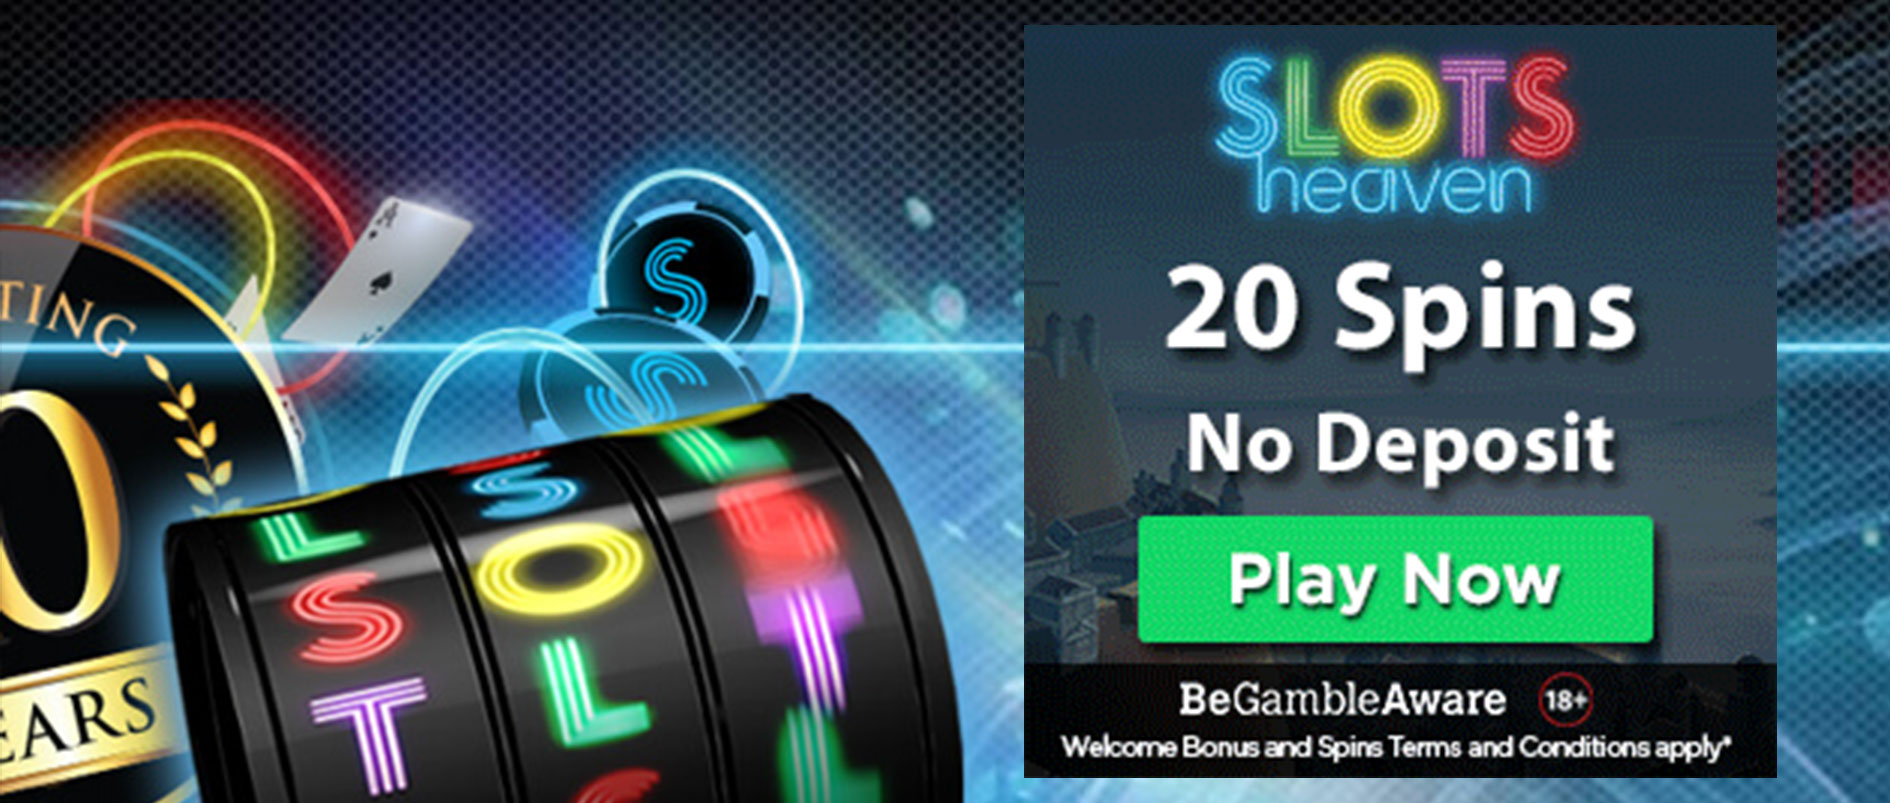 slots heaven 20 free spins